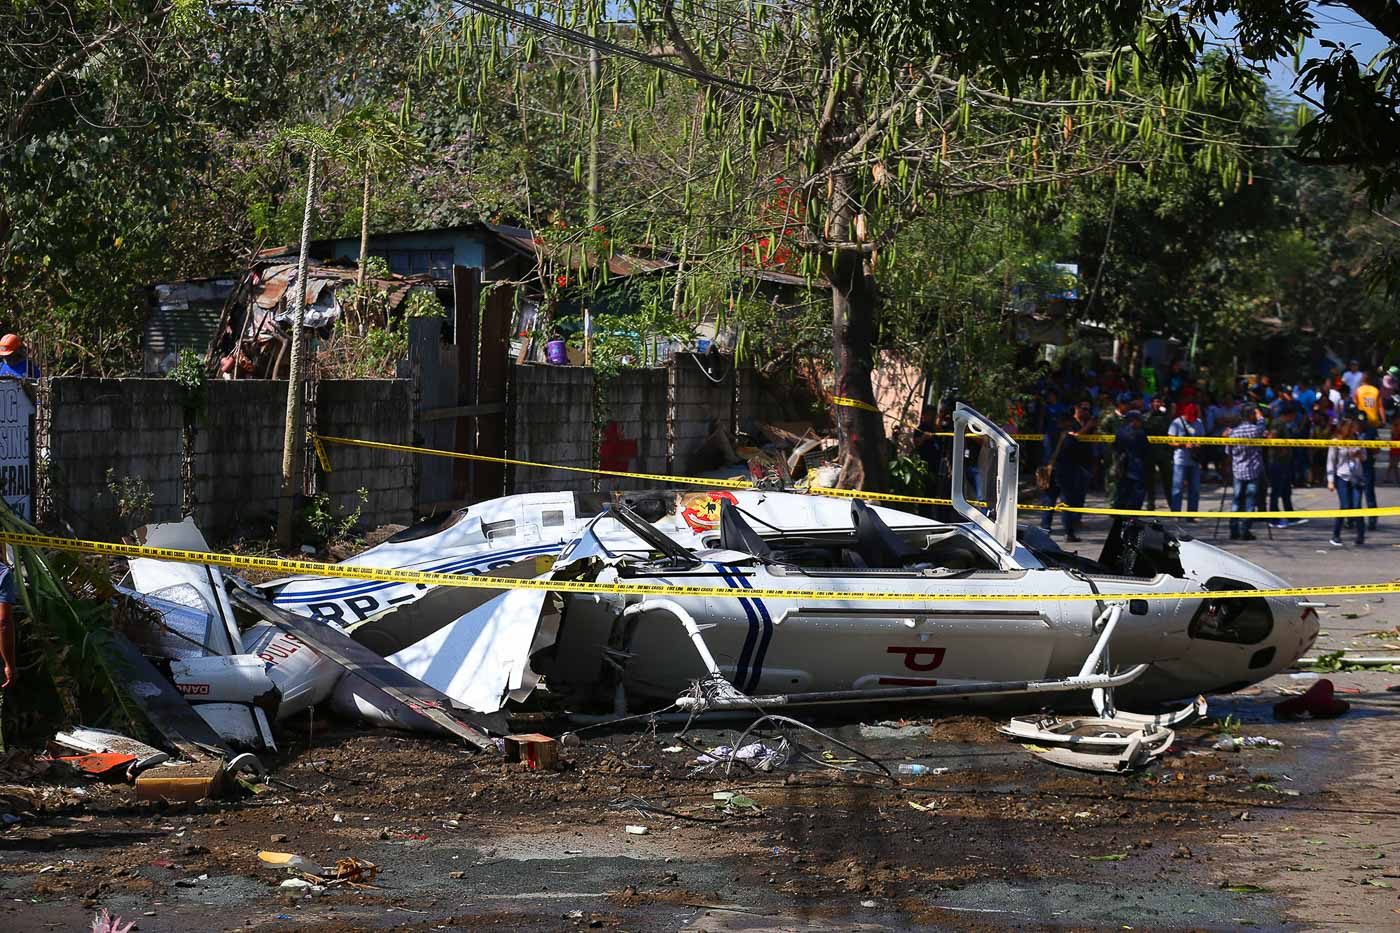 CRASH SITE. The helicopter carrying PNP Chief Archie Gamboa and other police officials crash in Barangay San Antonio, San Pedro, Laguna on March 5, 2020. Photo by Inoue Jaena/Rappler 